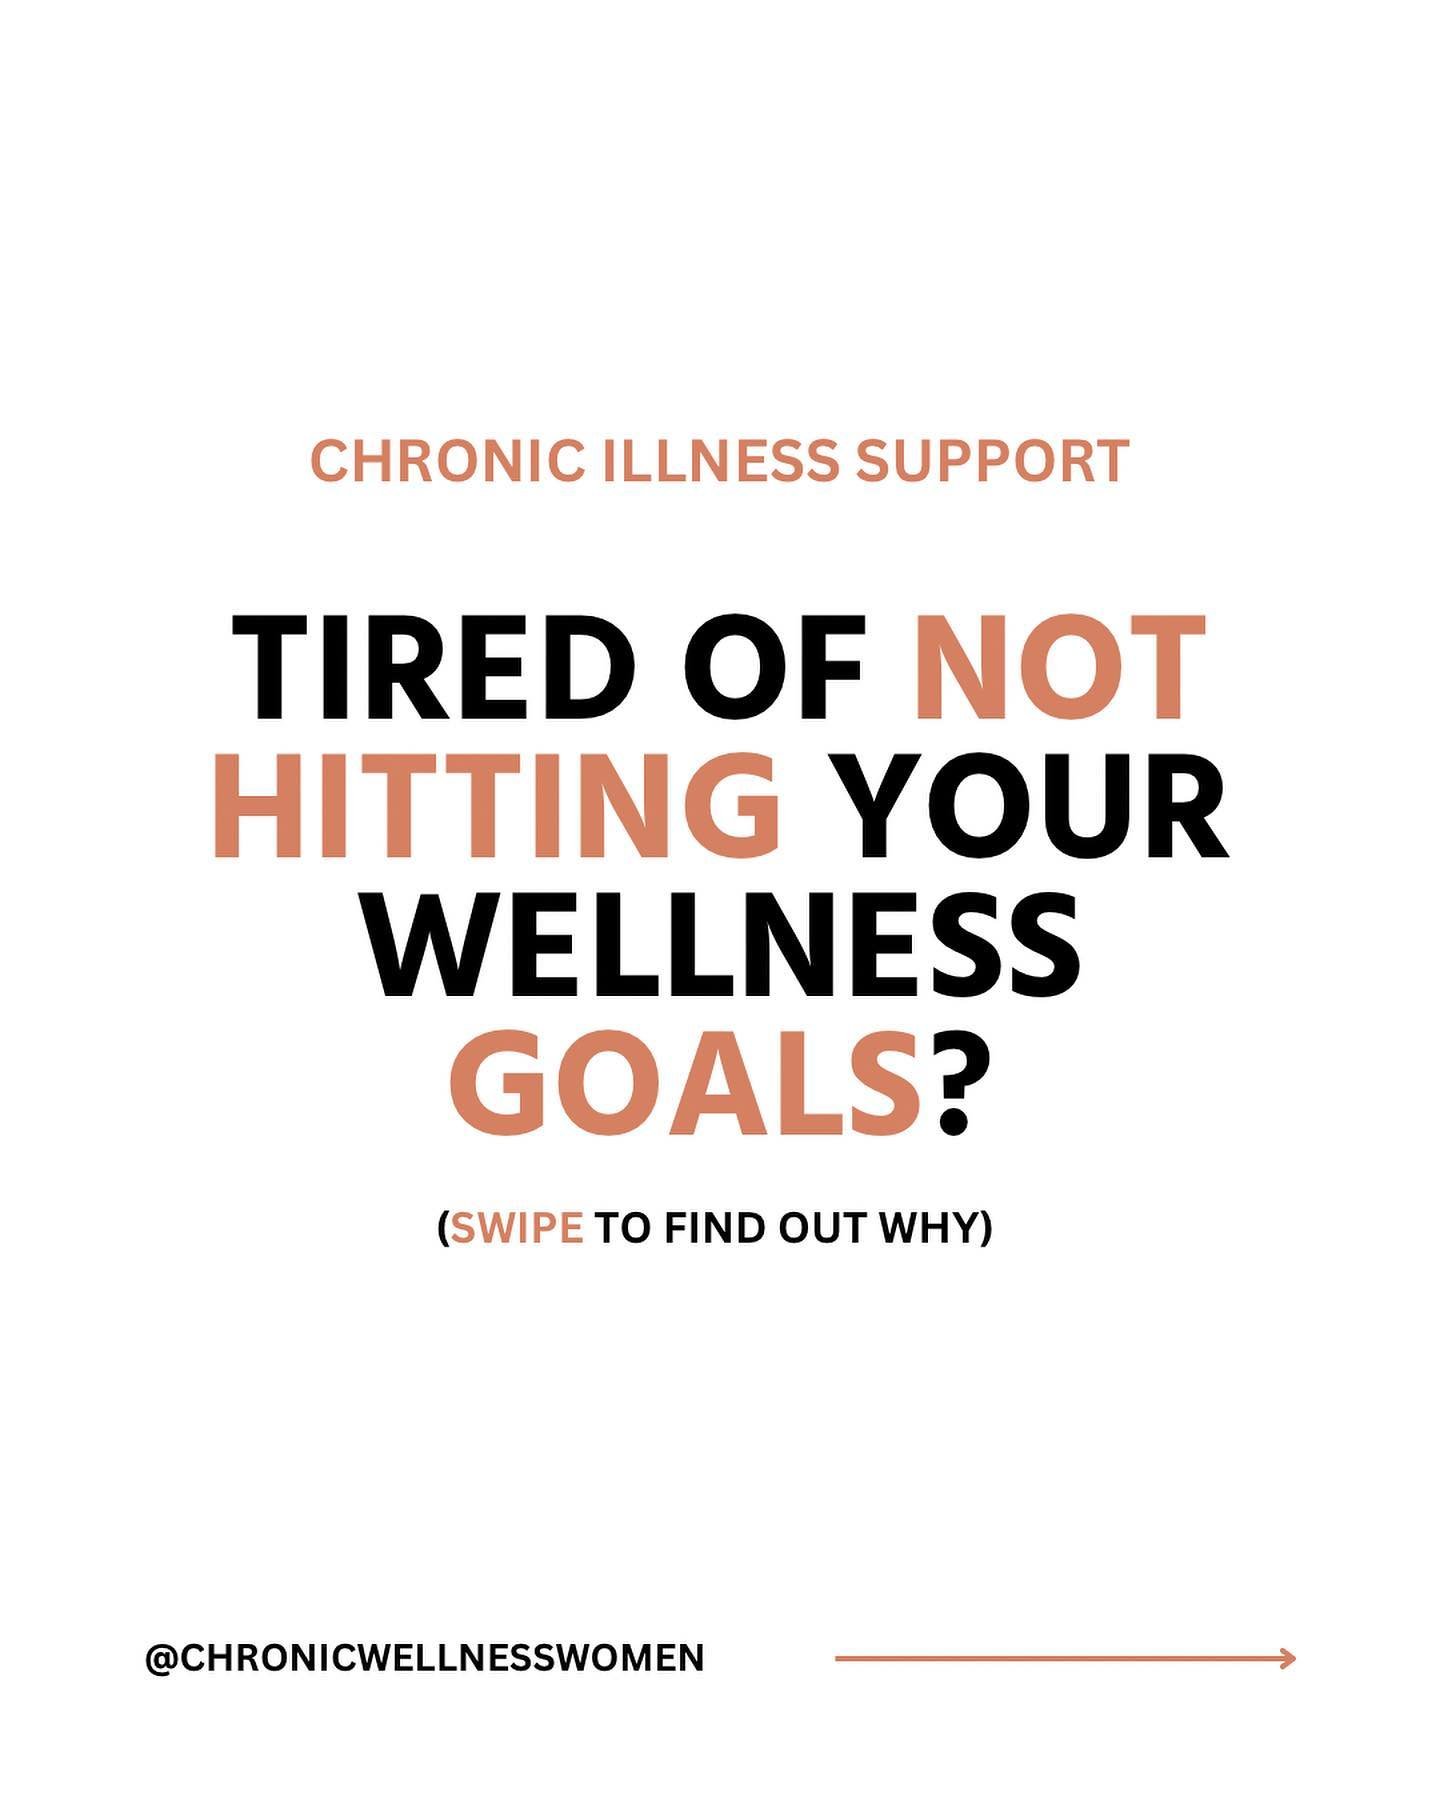 CWW is here to put an end to failed wellness goals!

In the chronic illness journey, it&rsquo;s so easy to get discouraged &mdash; most of the time we feel alone, unheard, and don&rsquo;t know what the next step is. 

We know it, because we live it! 